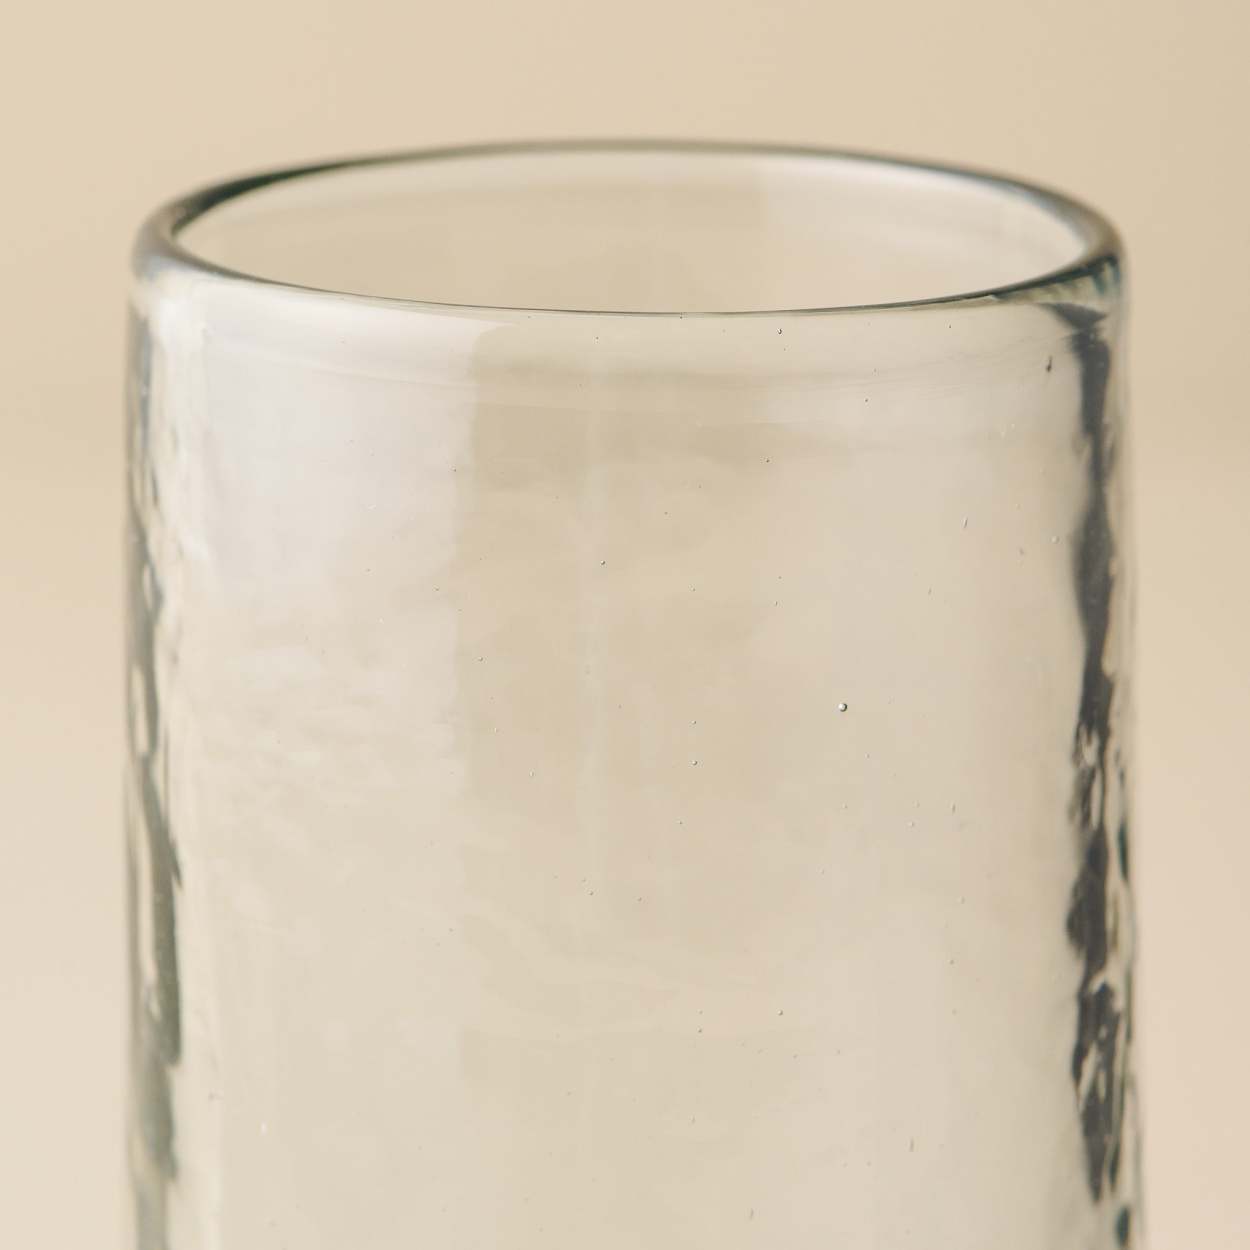 Best Small Glass Cups for sale in Griffin, Georgia for 2023